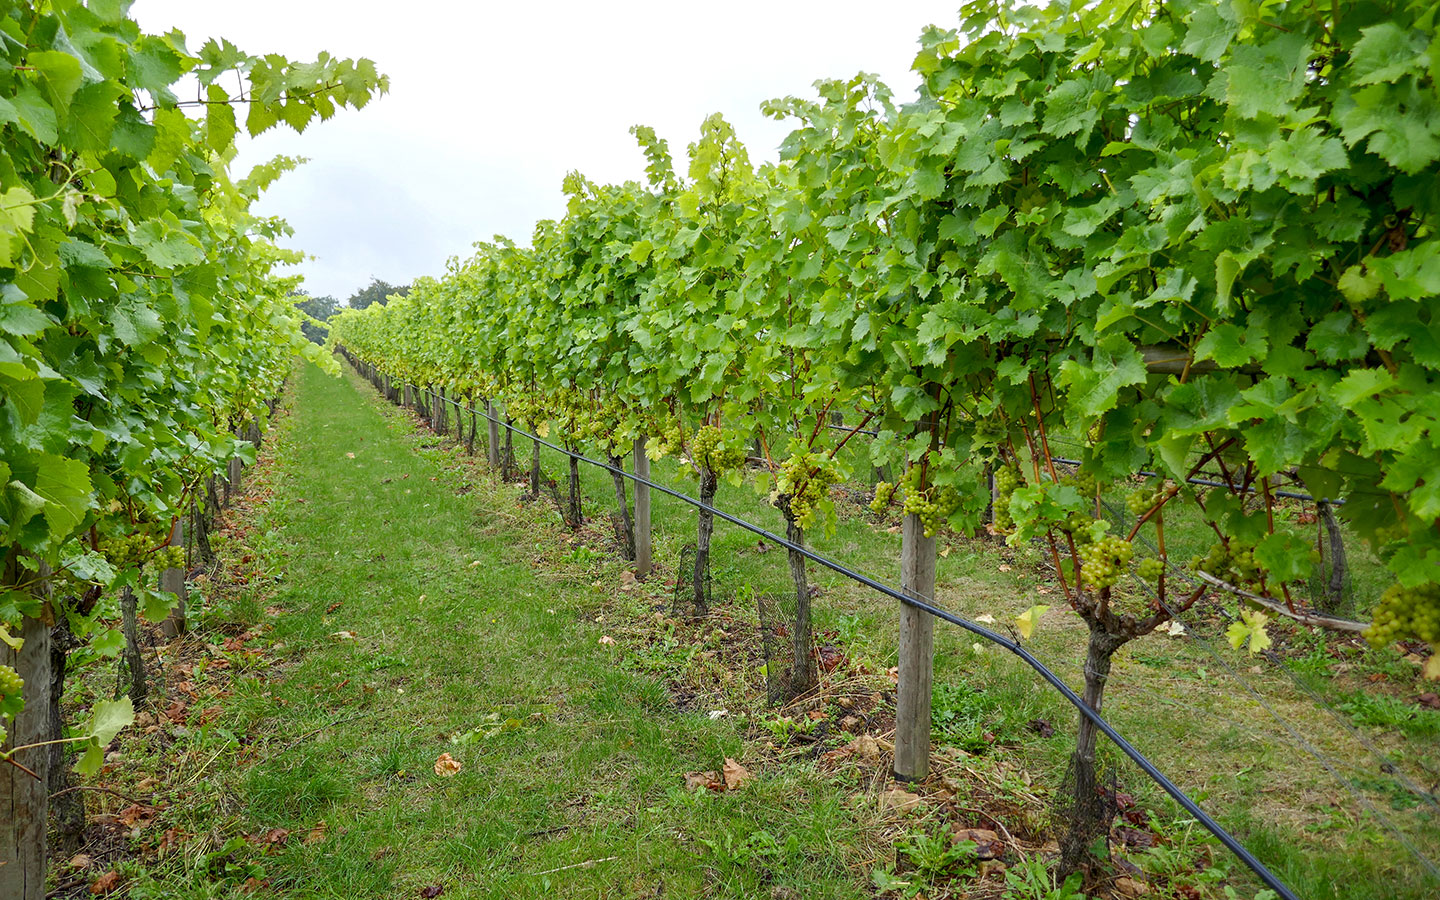 Among the vines at the vineyard's Woodchester site